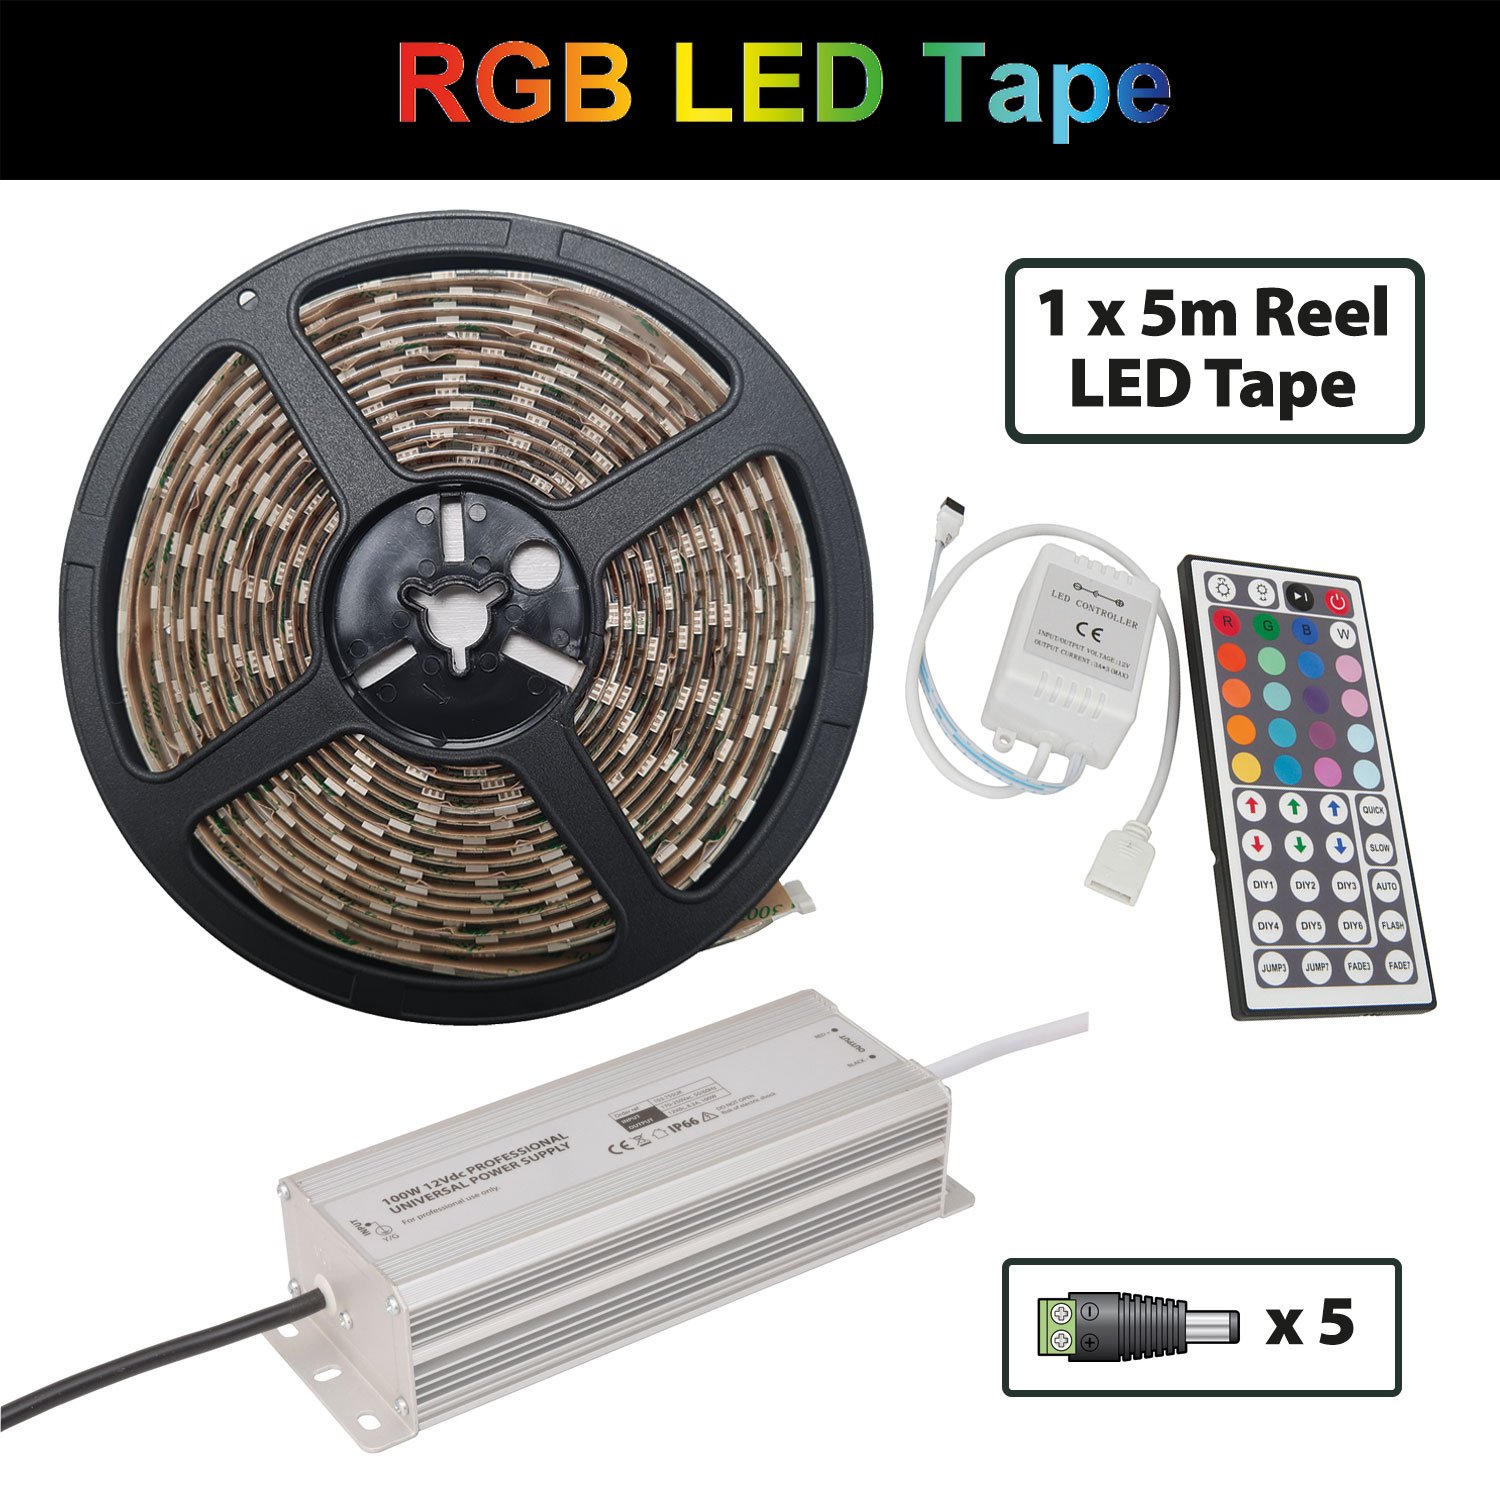 12V Professional RGB LED Tape Packages 5m RGB 12V LED Tape with 44 Button IR Controller